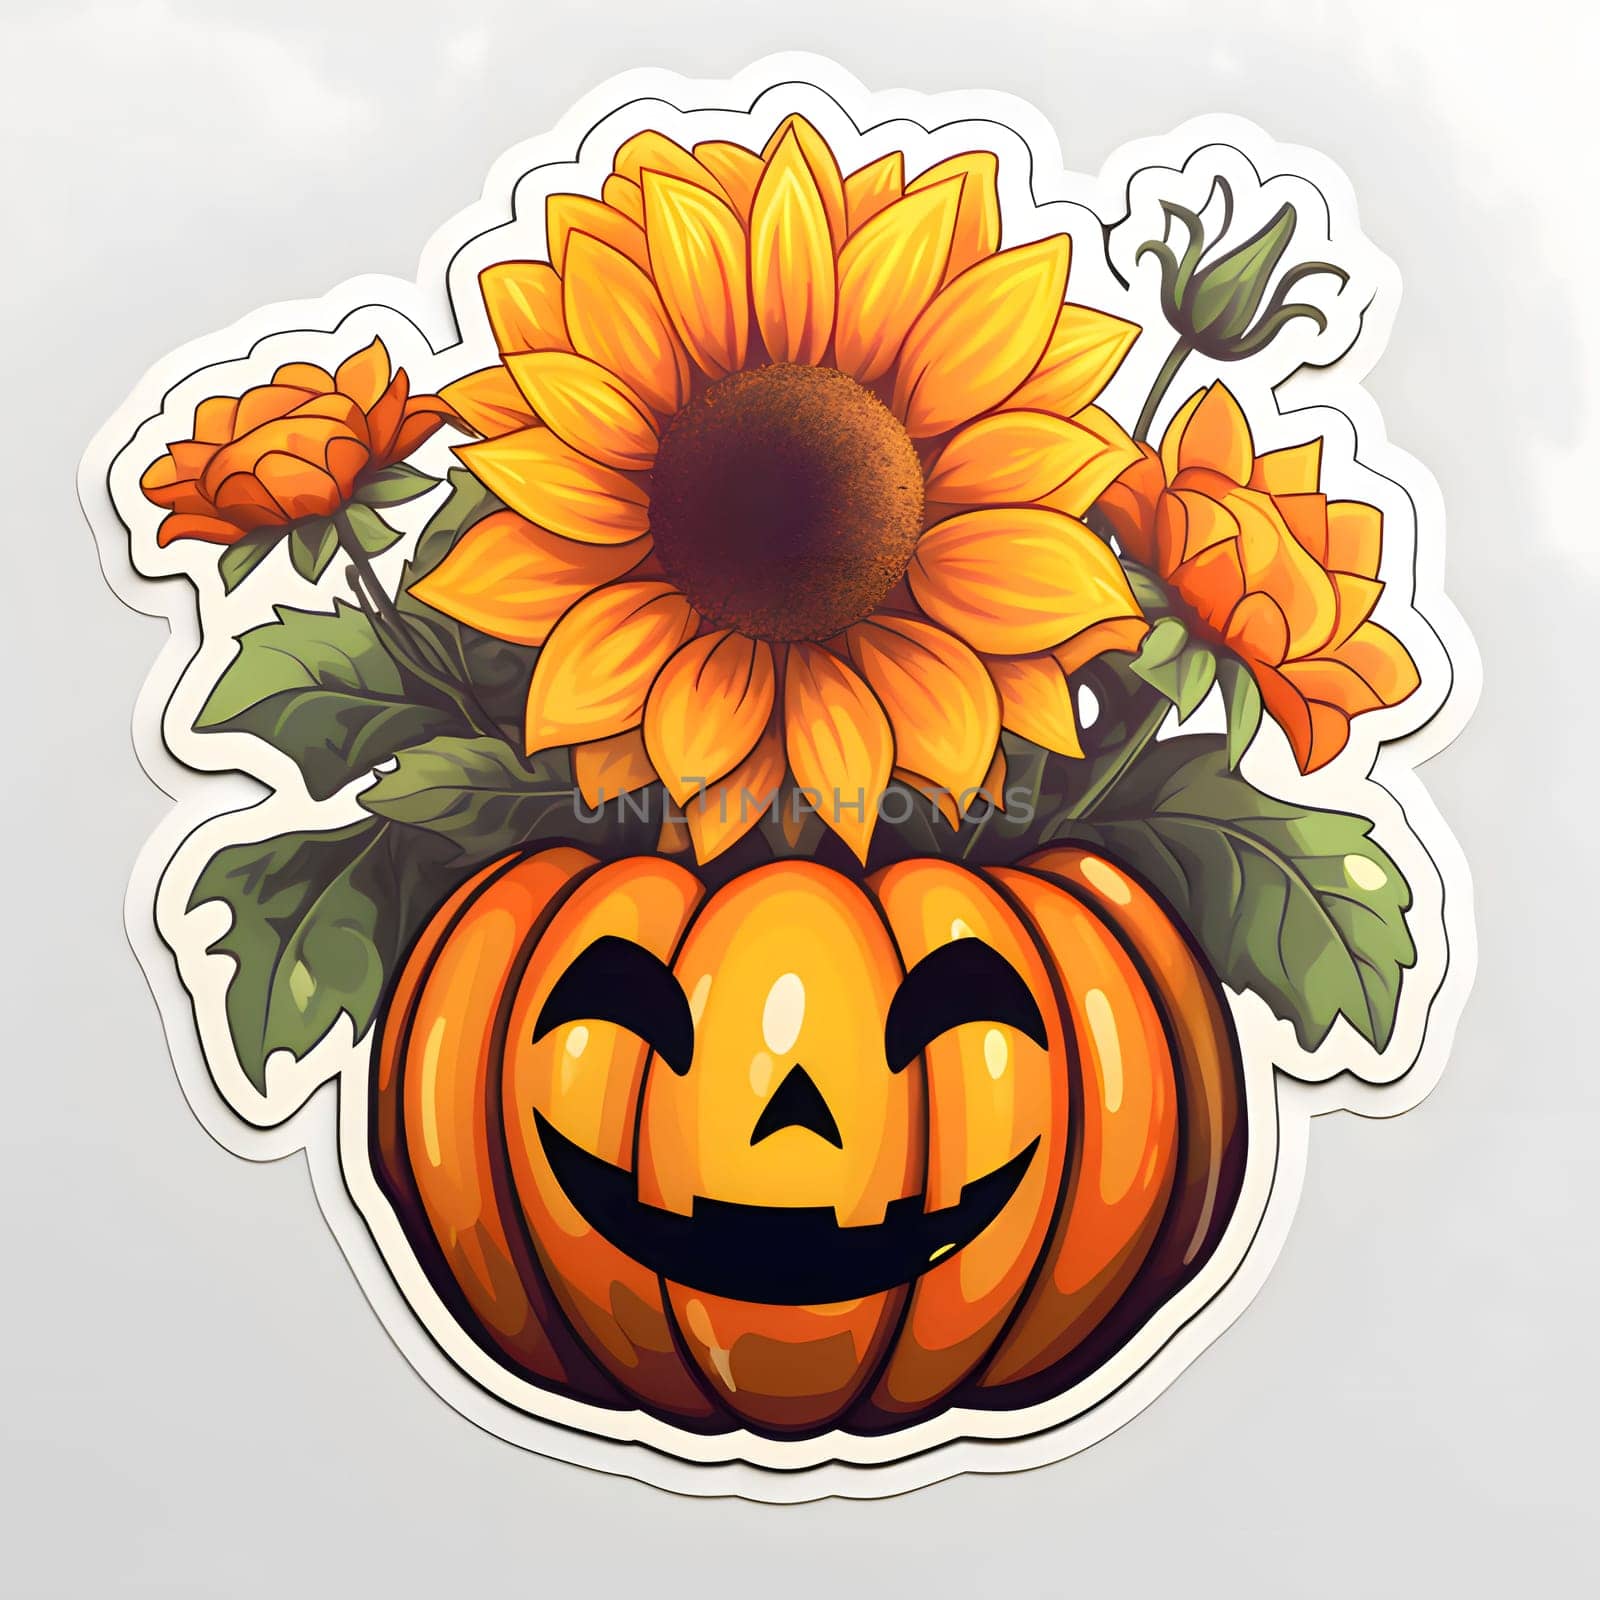 Jack-o-lantern pumpkin sticker with sunflowers, Halloween image on a bright isolated background. by ThemesS